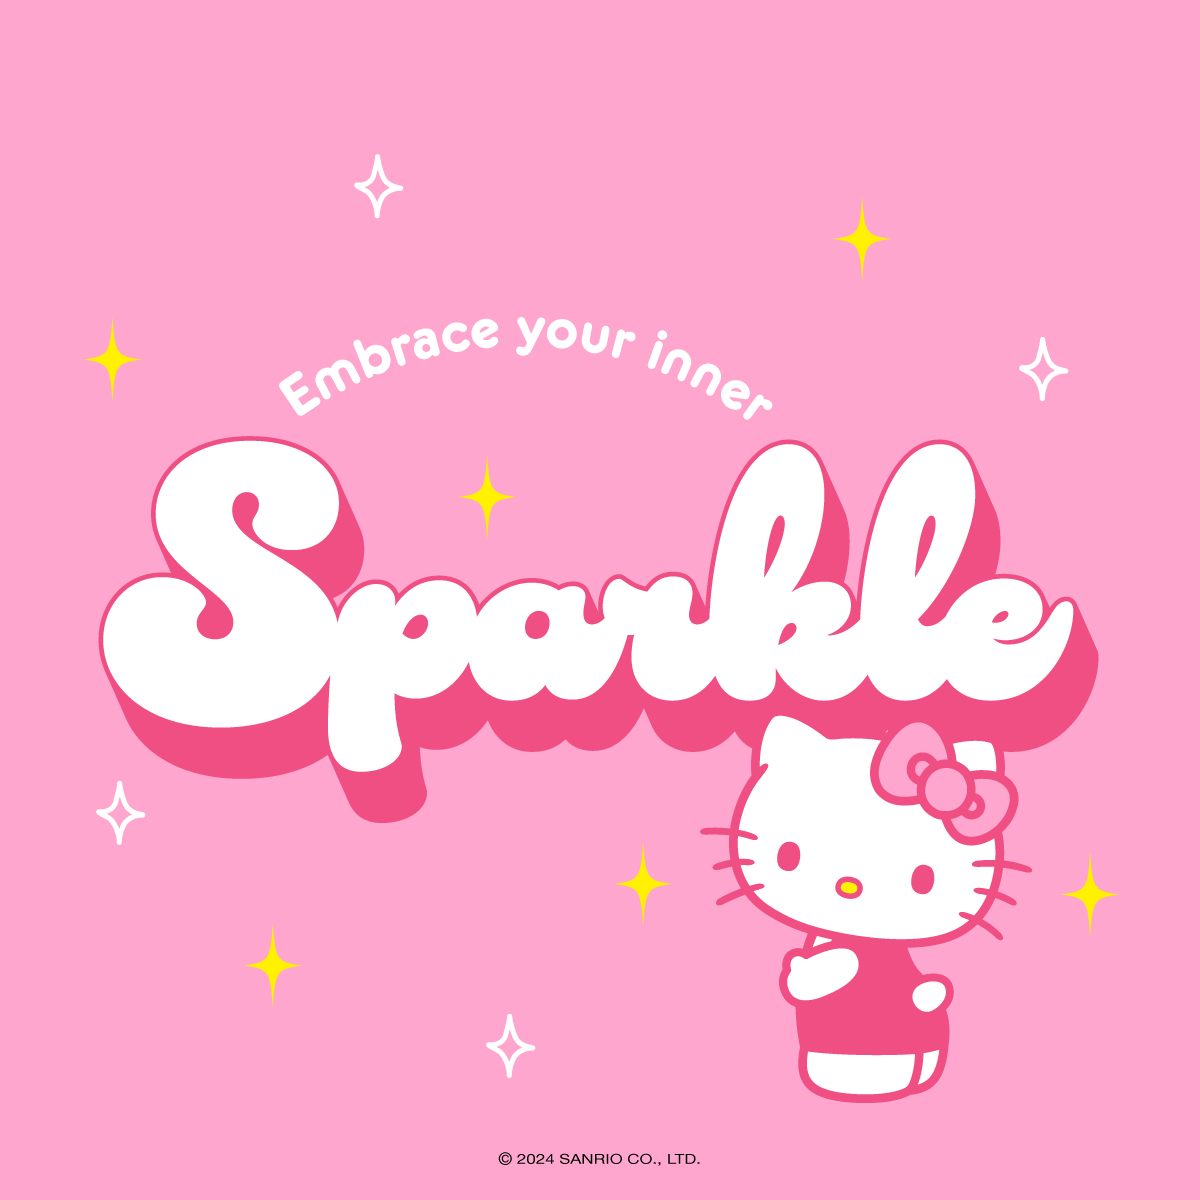 Sparkle and shine ✨ Tag your bestie! #mondaymotivation